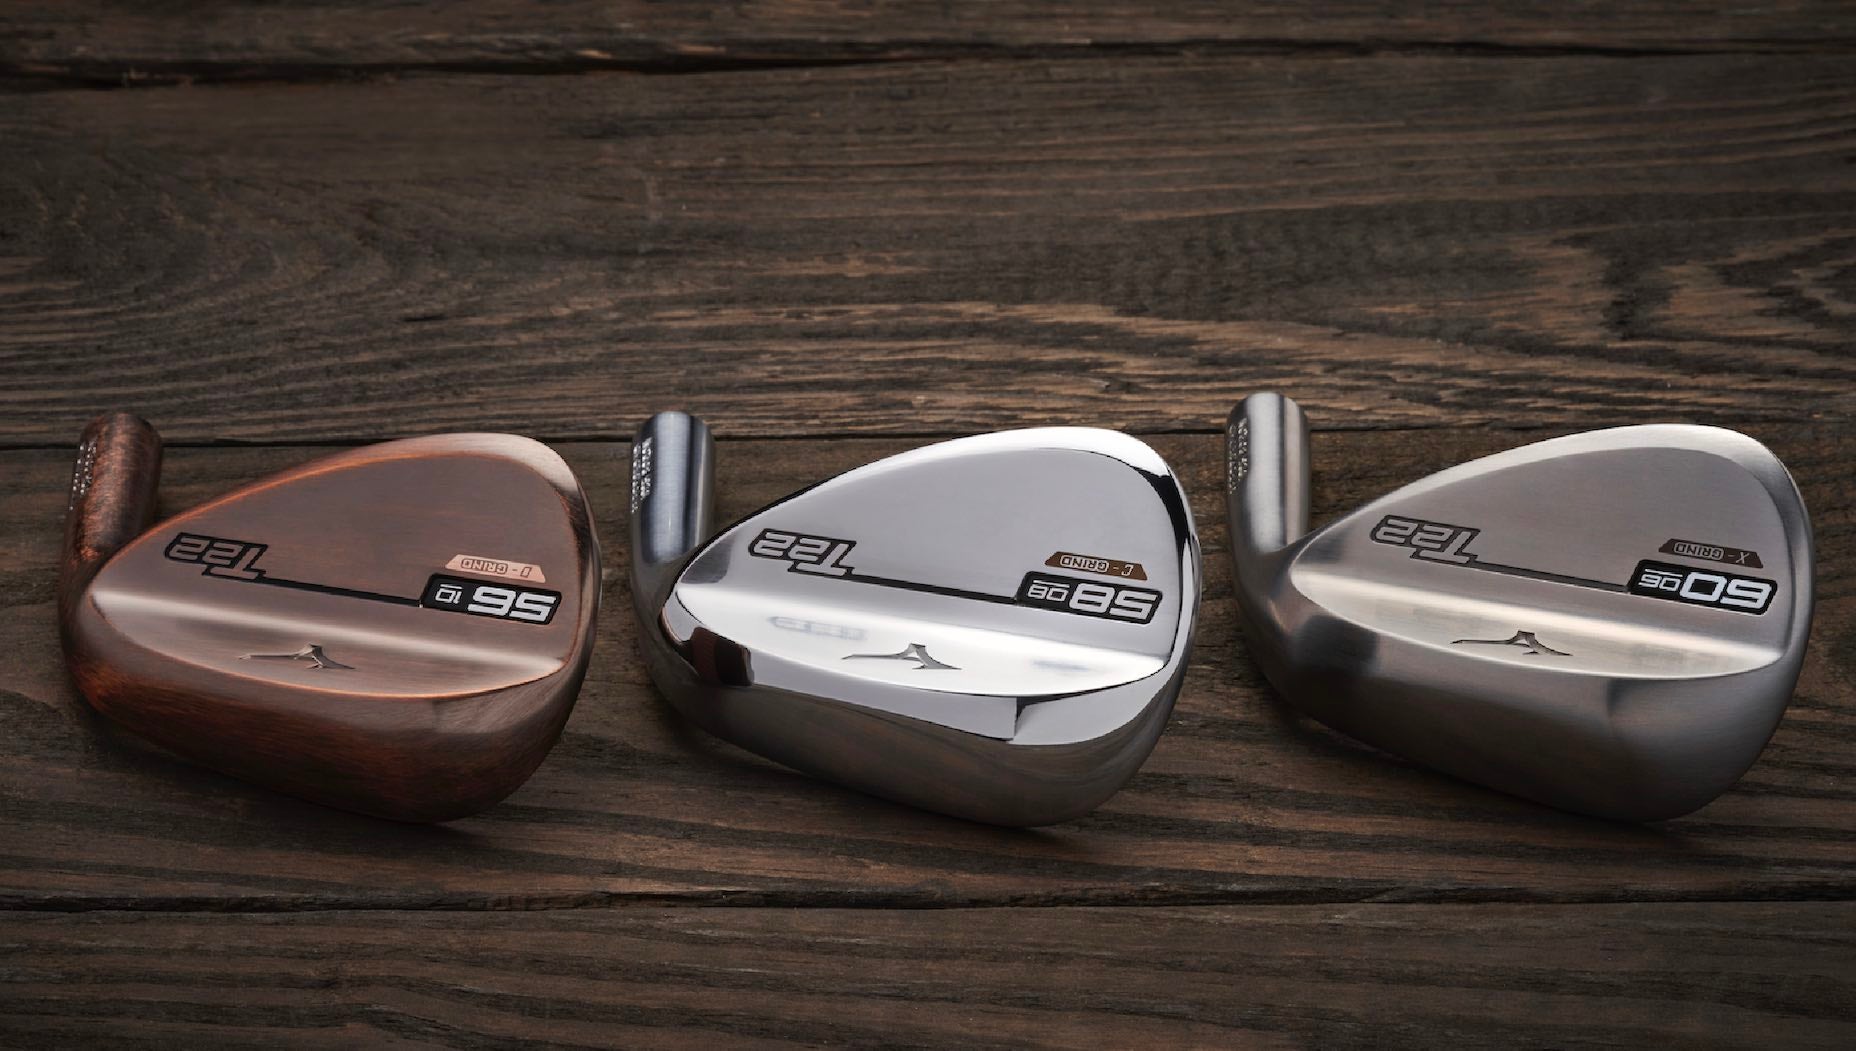 FIRST LOOK: Mizuno adds new finishes, grinds to T22 wedge line - Golf